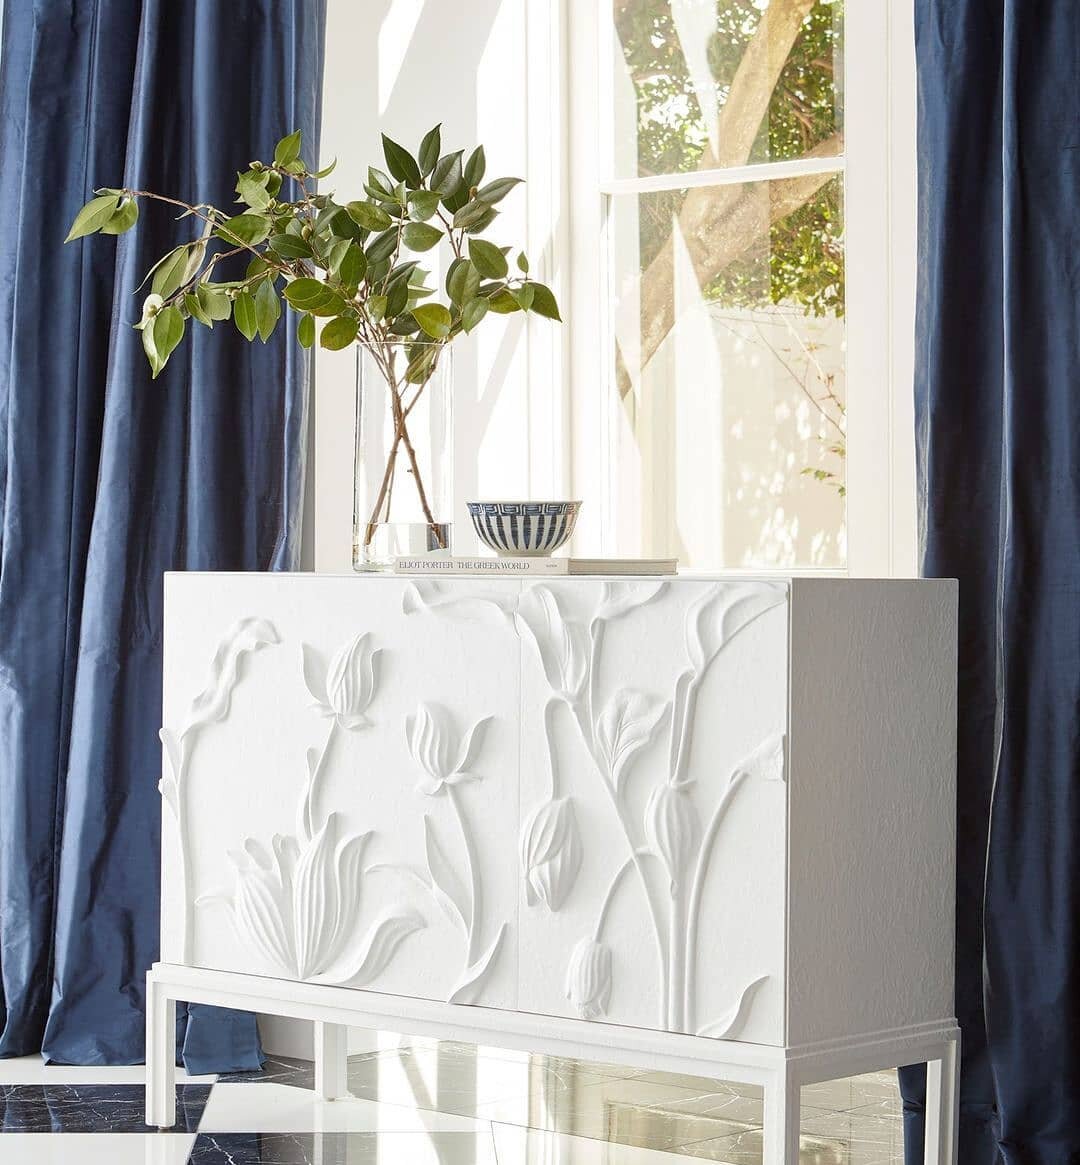 Our latest design crush is this ornate chest @bakerfurniture inspired by the style and beauty of a botanical arrangement created in a matte white plaster sculpted form.
Reposted from @bakerfurniture #thebakerluxecollection #designer #furniture #inter